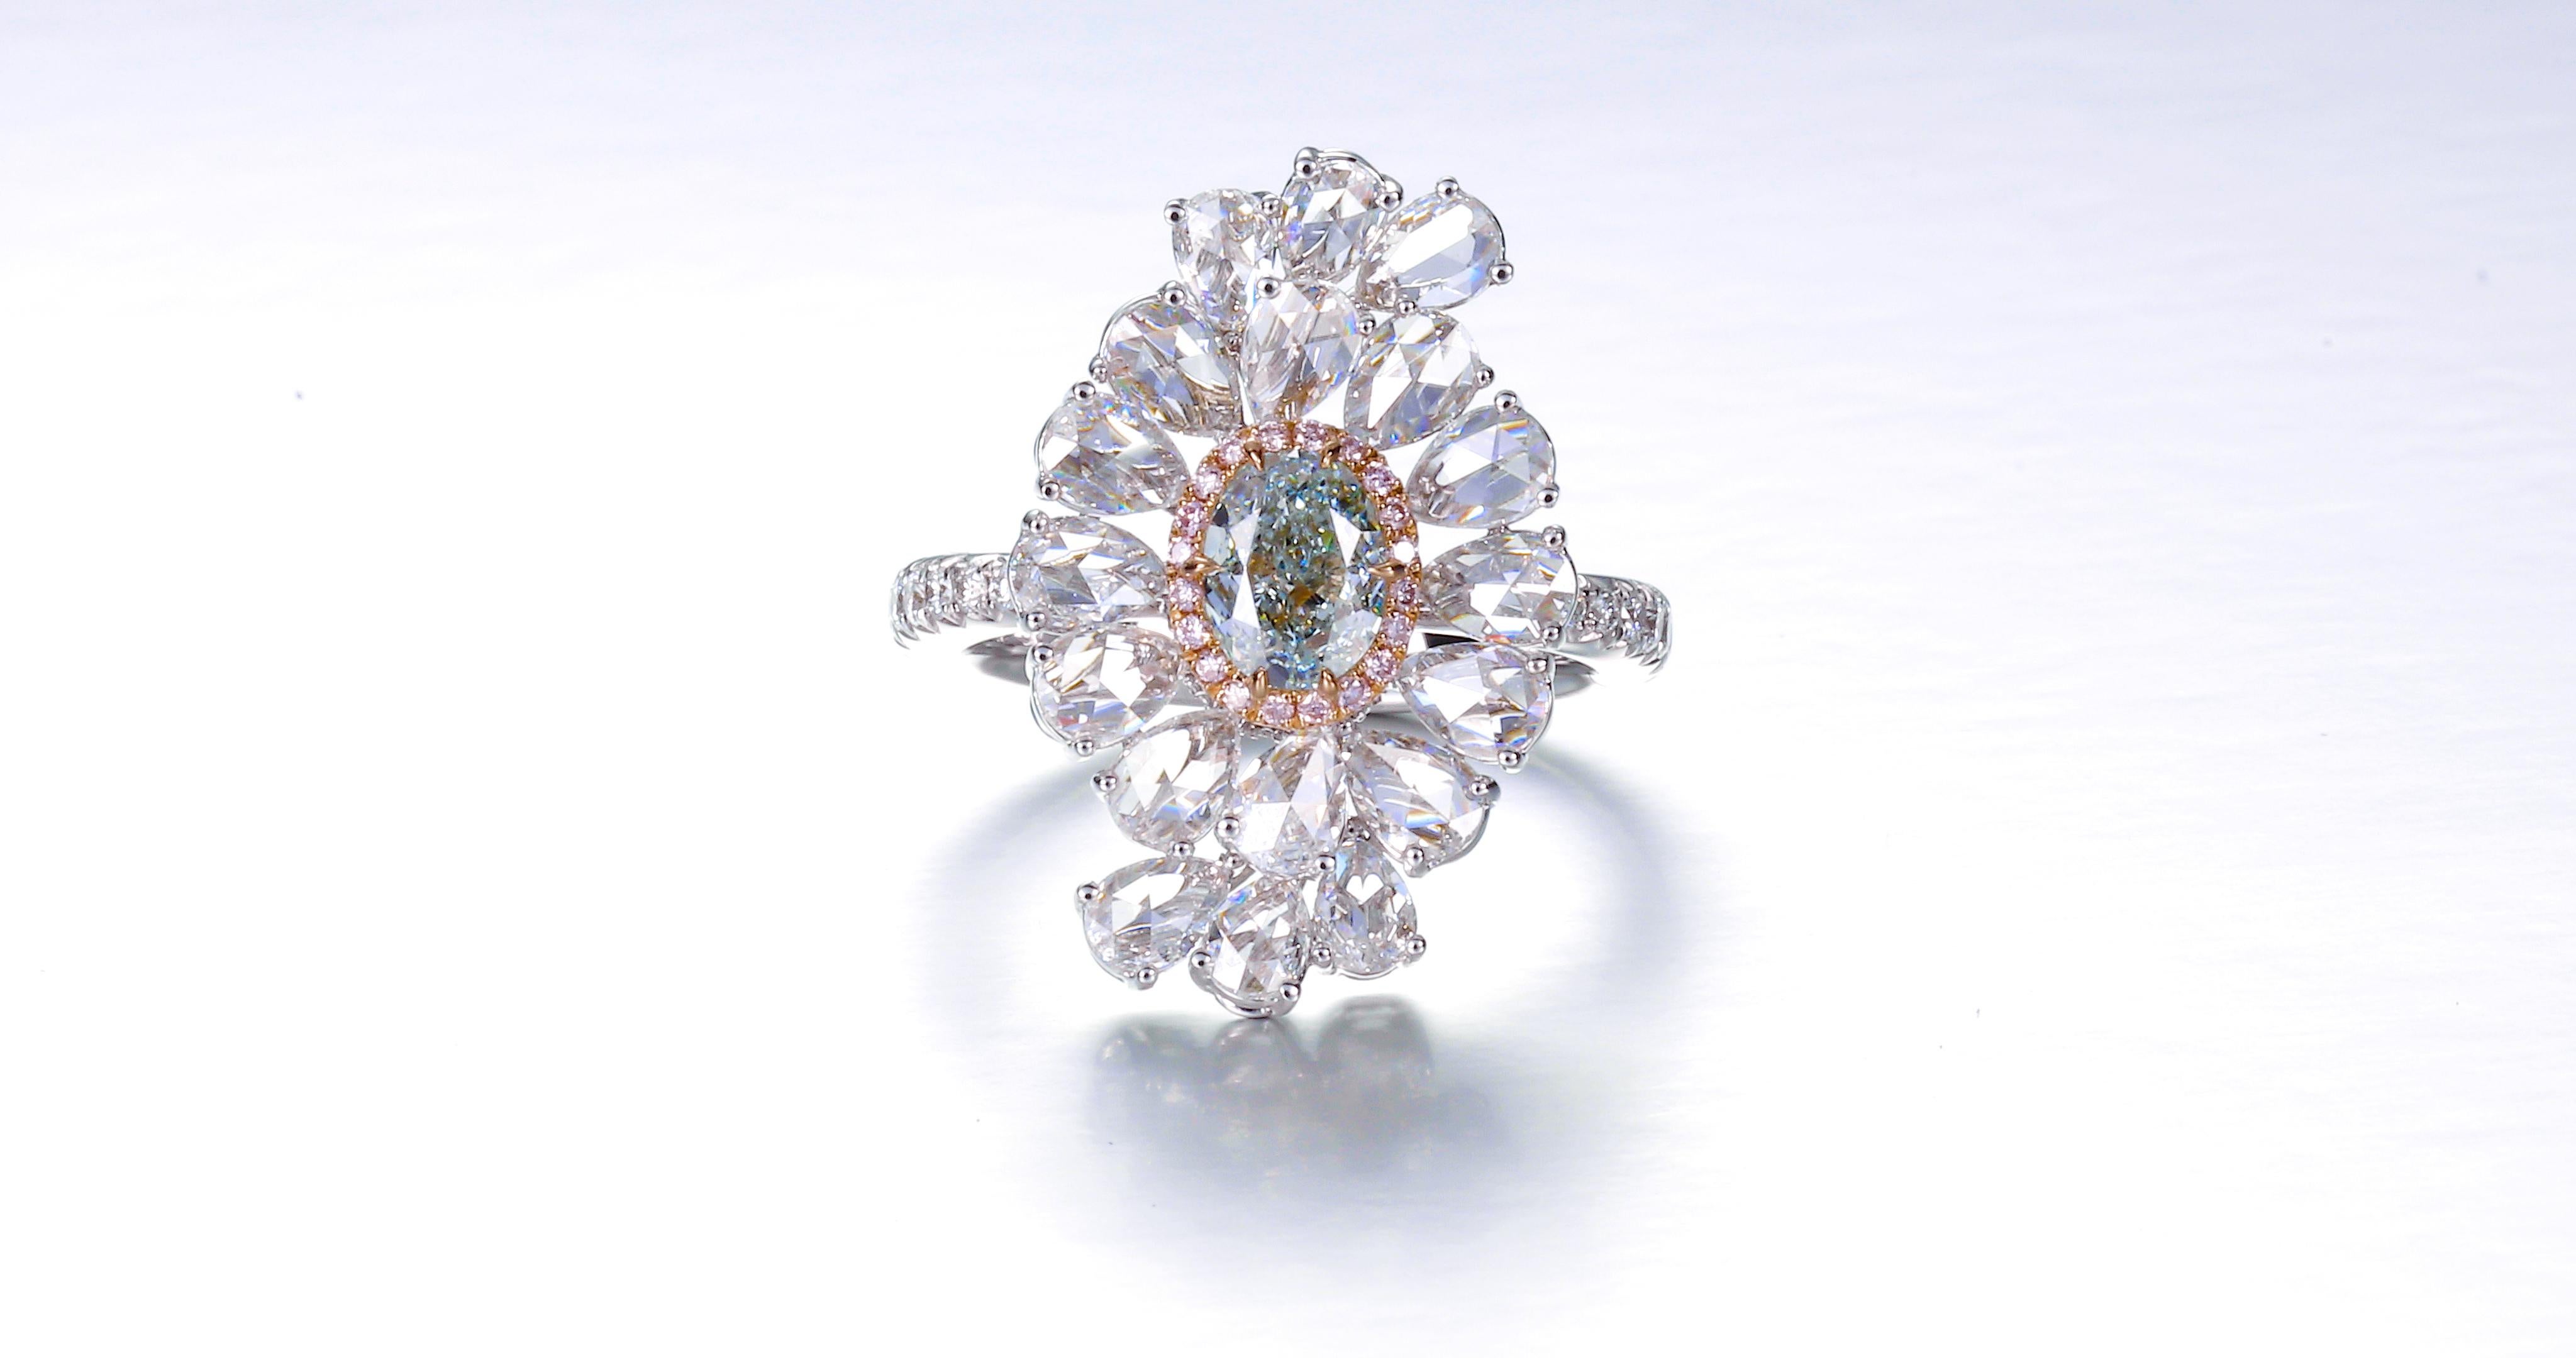 Introducing a truly enchanting and mesmerizing piece of jewelry, adorned with a remarkable centerpiece - a GIA-certified 0.83-carat natural oval-shaped fancy blue-green color diamond. This exquisite gemstone takes center stage on a ring that exudes